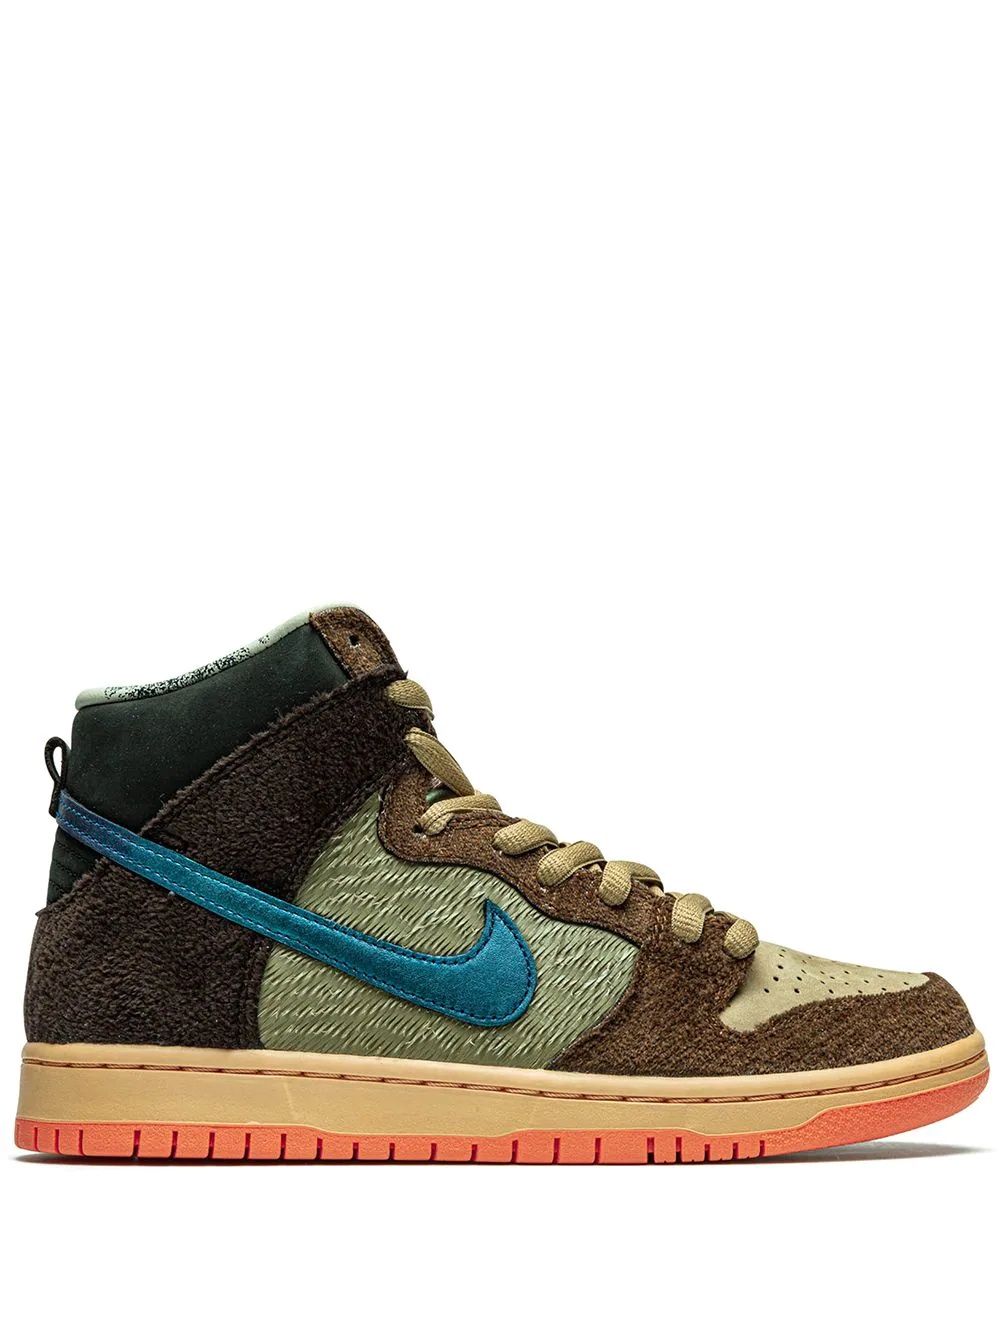 x Concepts SB Dunk High "Turdunken - Special Packaging" sneakers - 1